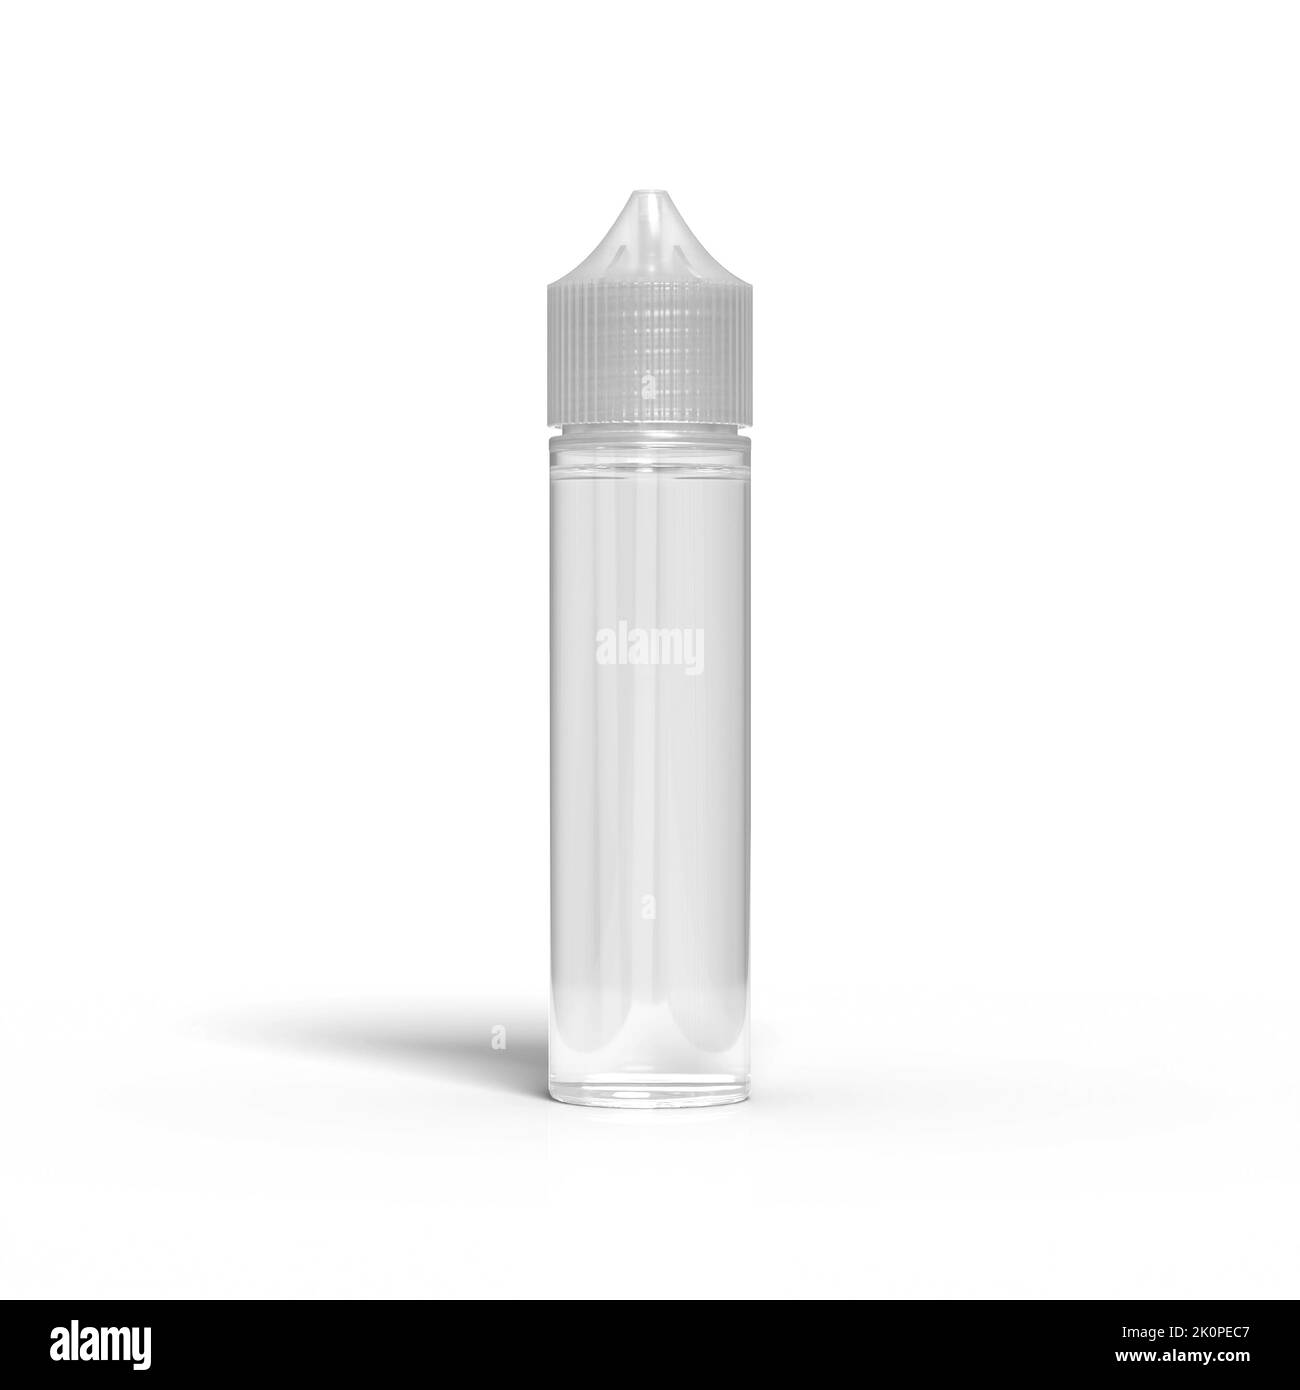 Transparent Clear 60ml Chubby Gorilla Unicorn Vape Juice Bottle filled with clear liquid and isolated on a white background, 3d render illustration. Stock Photo